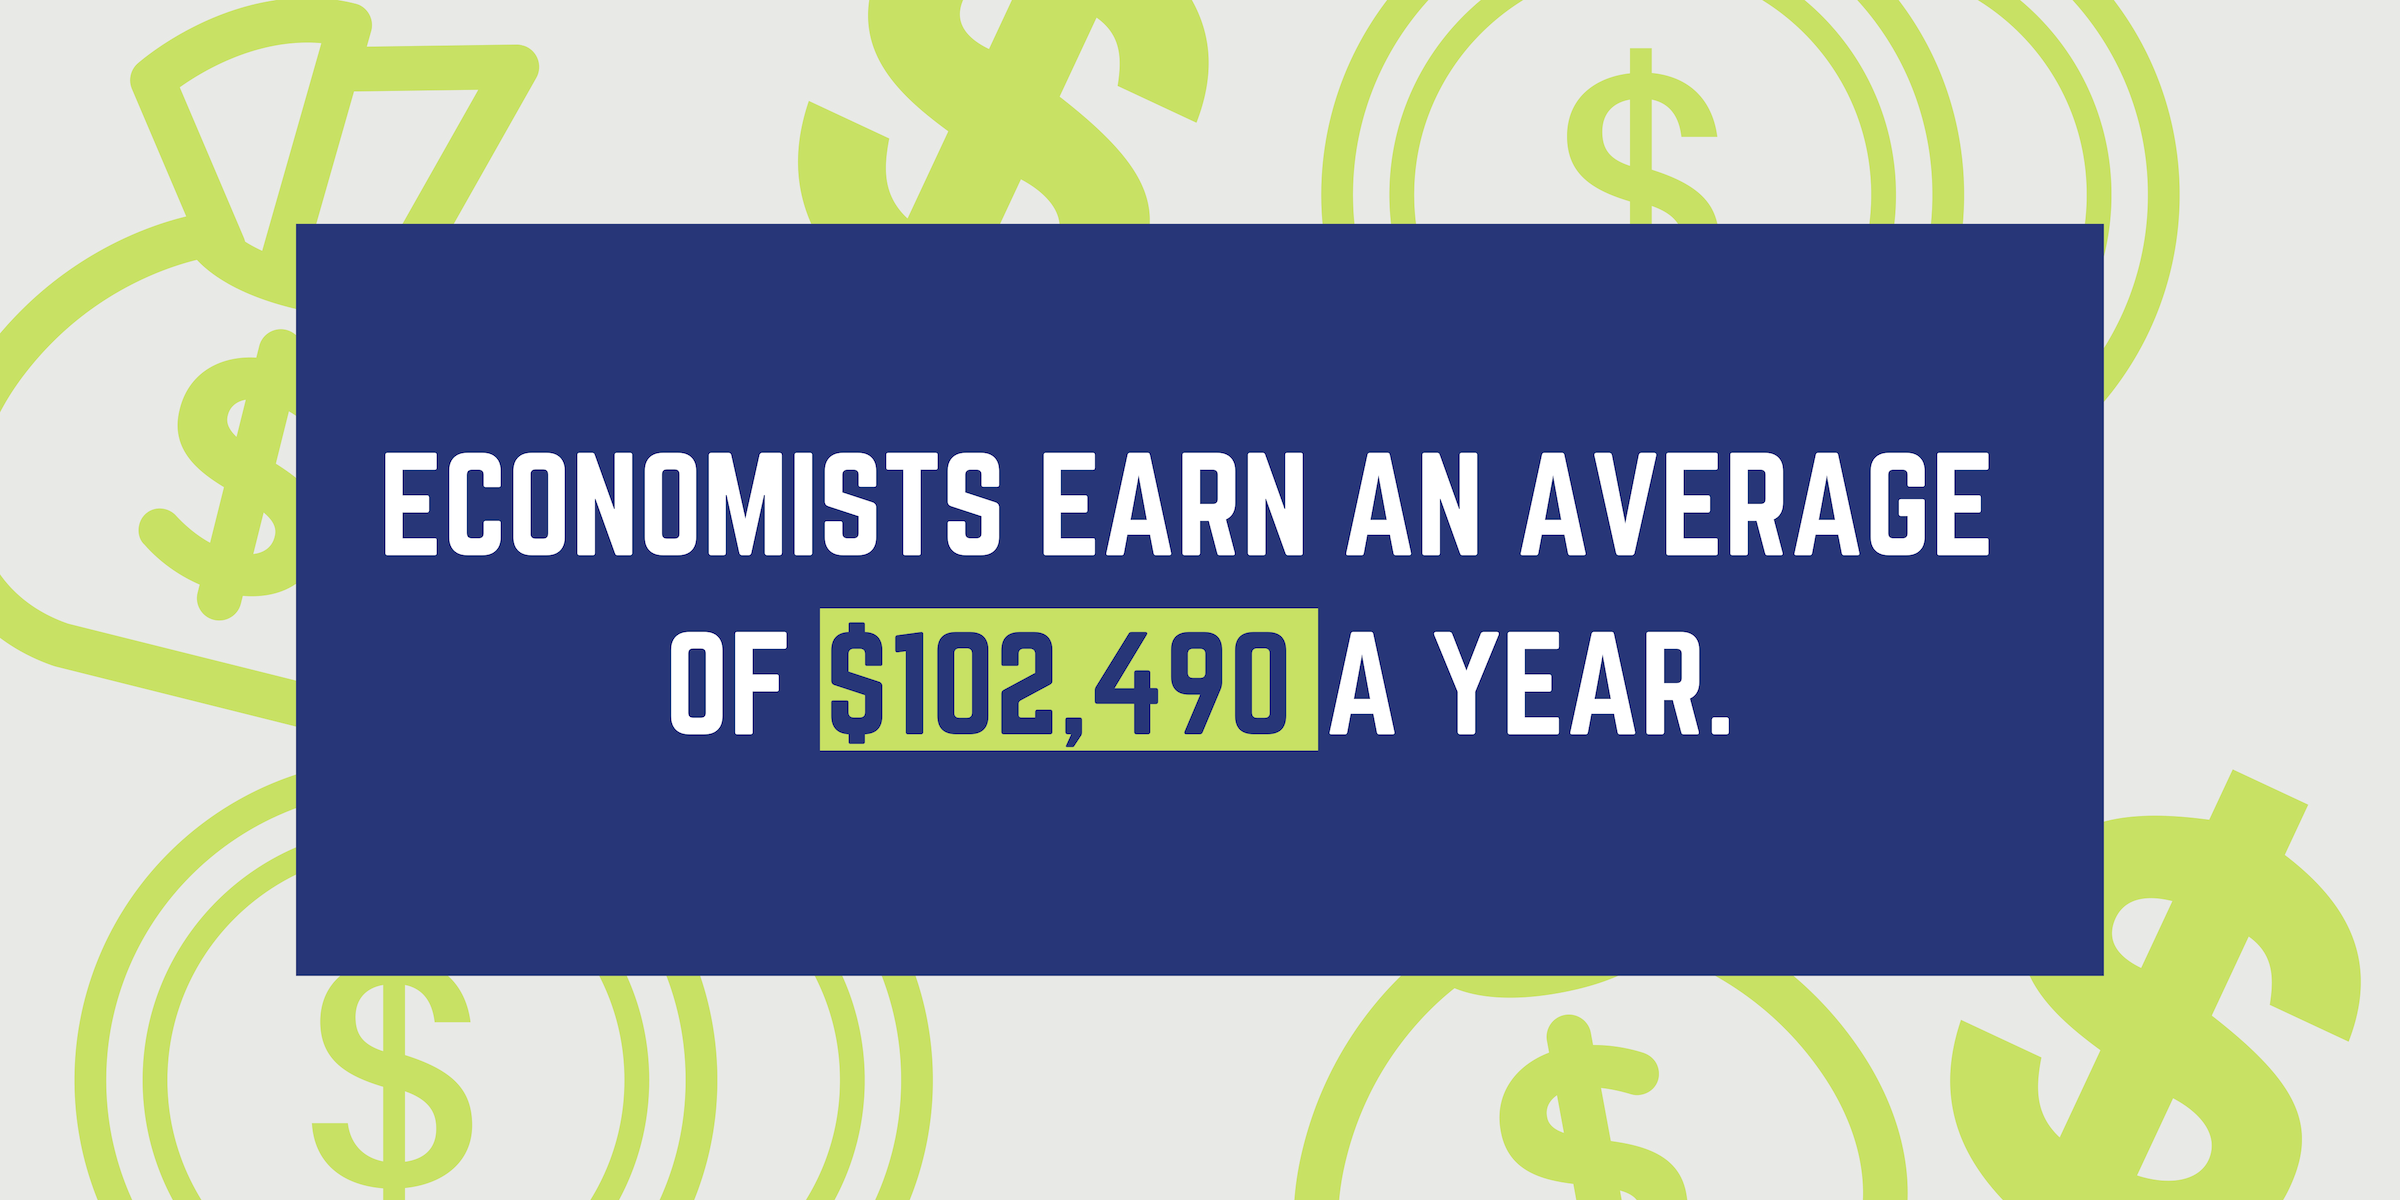 Economists earn an average of $102,490 a year.